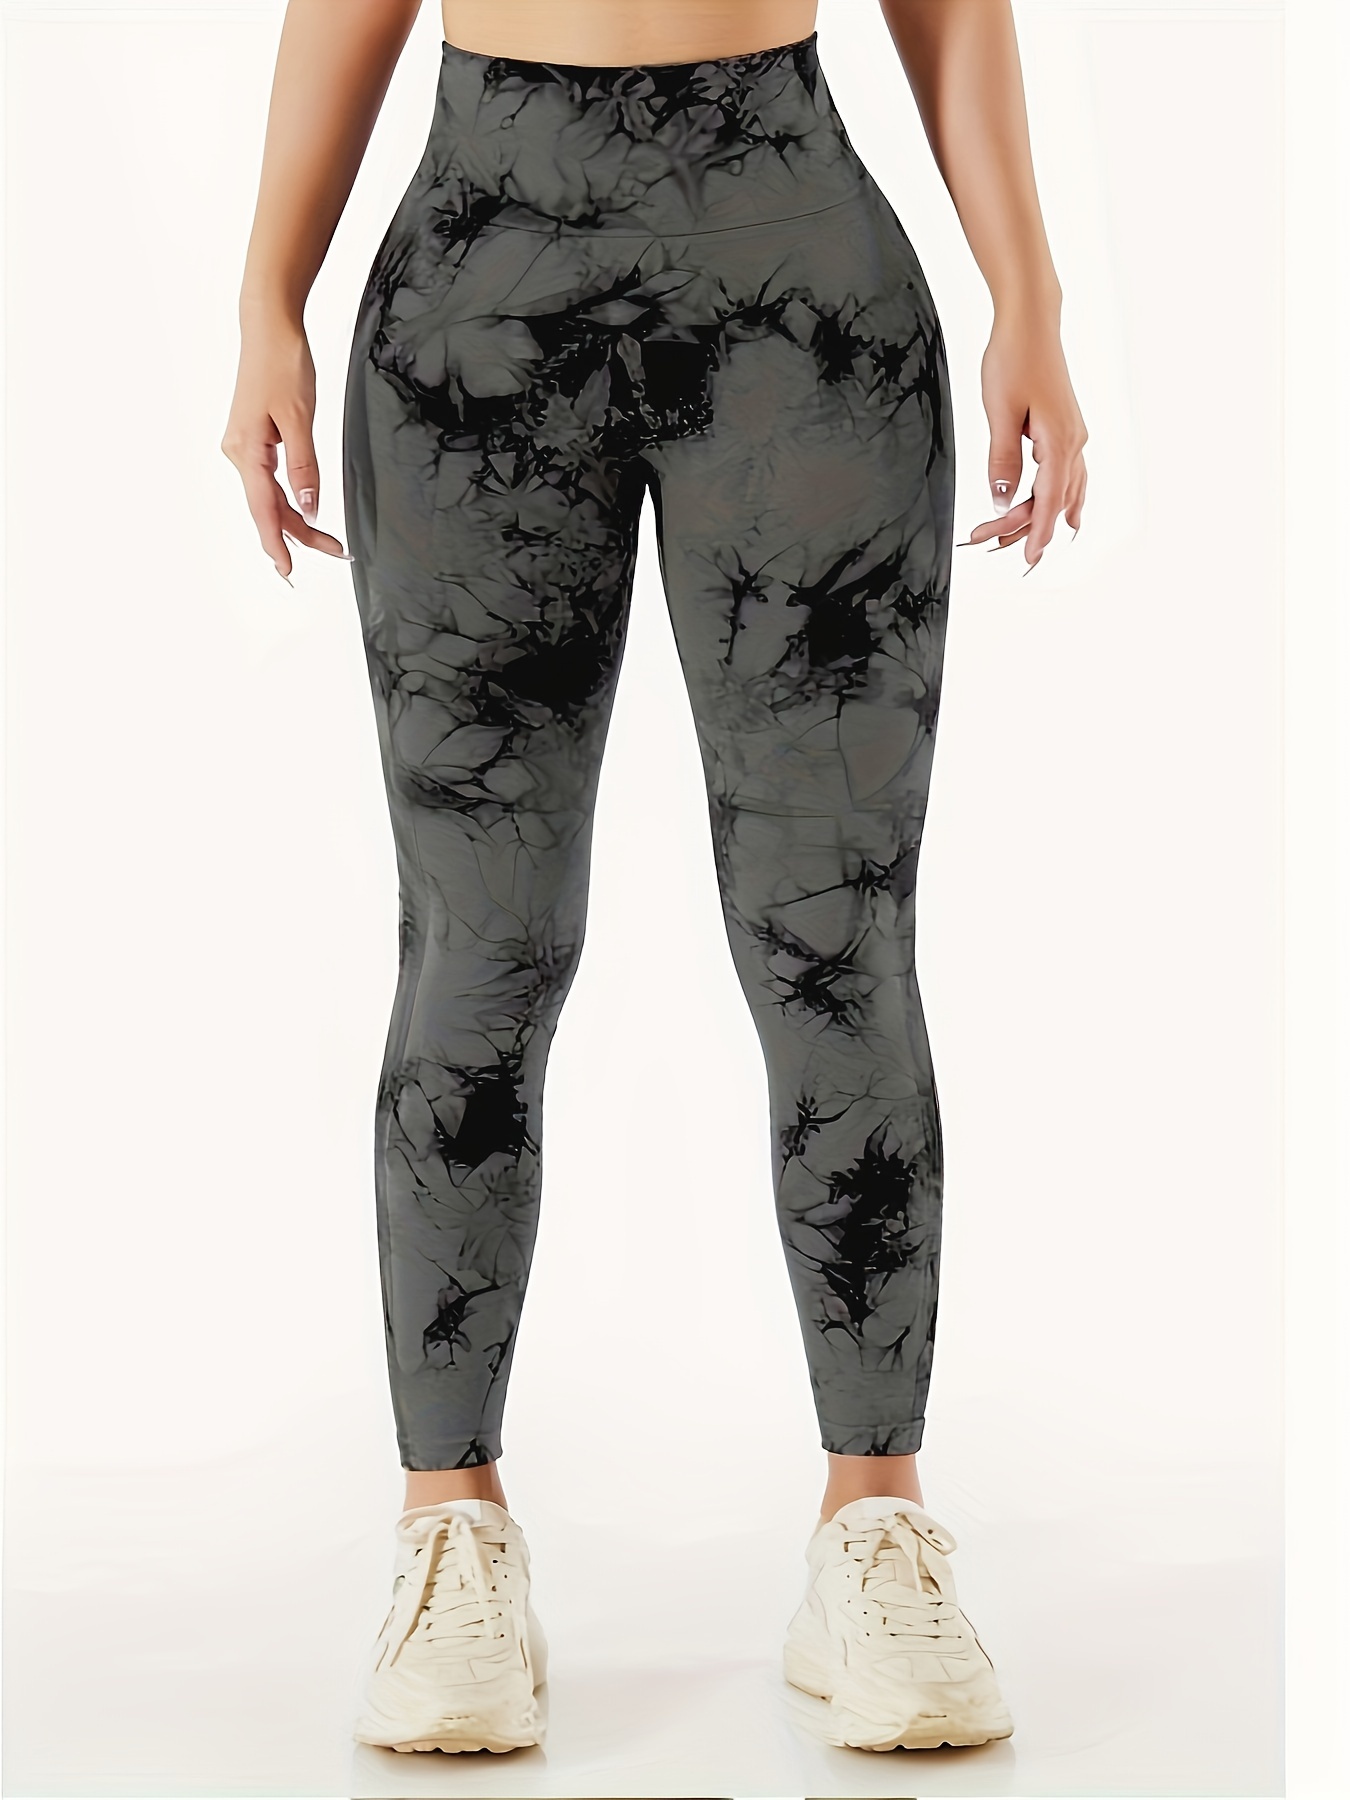 SPXTREME [3 Pack] Tie Dye Leggings for Women Athletic Lounge Yoga Pants  4-Way Stretch Super Soft and Comfy at  Women's Clothing store